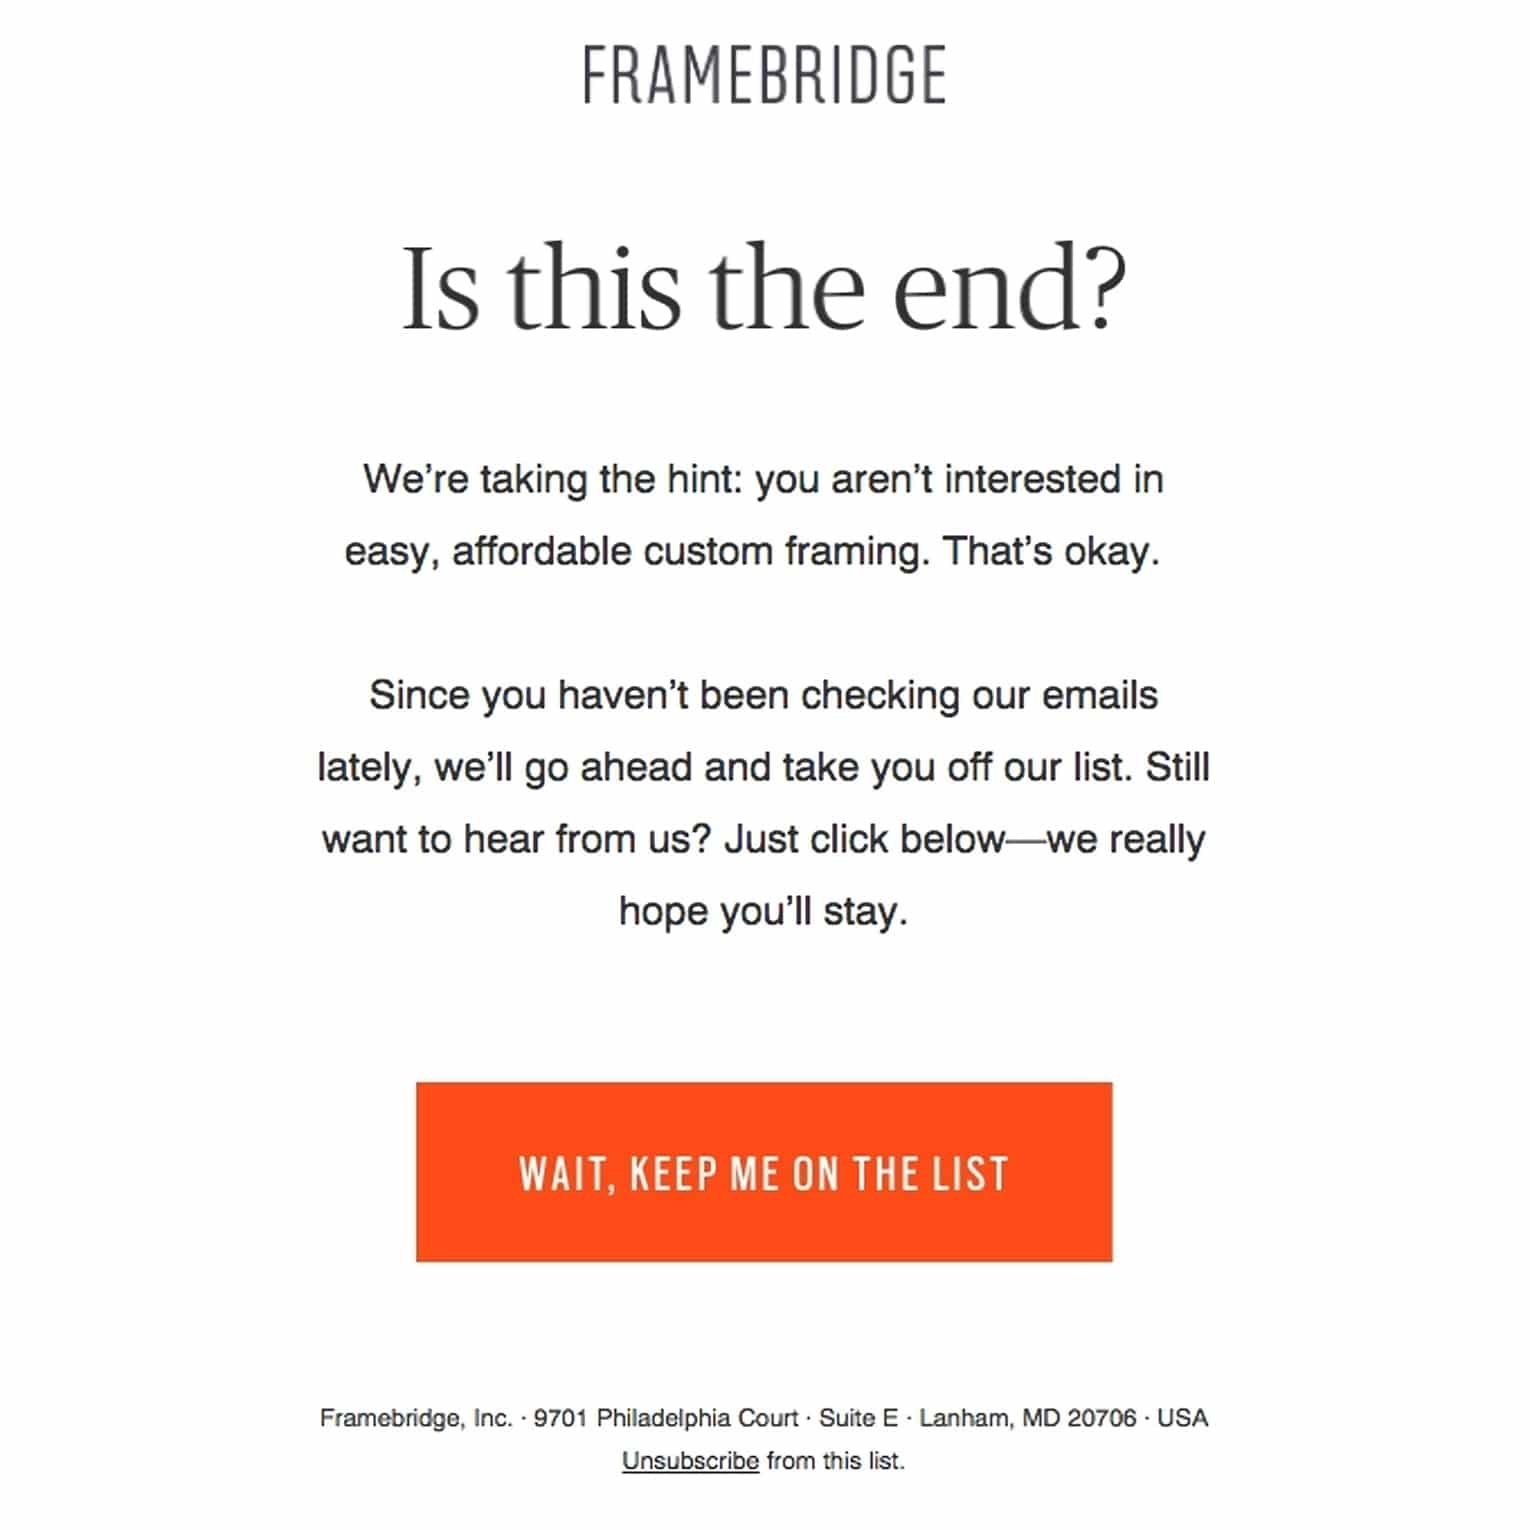 Framebridge email showing an example of a re-engagement message